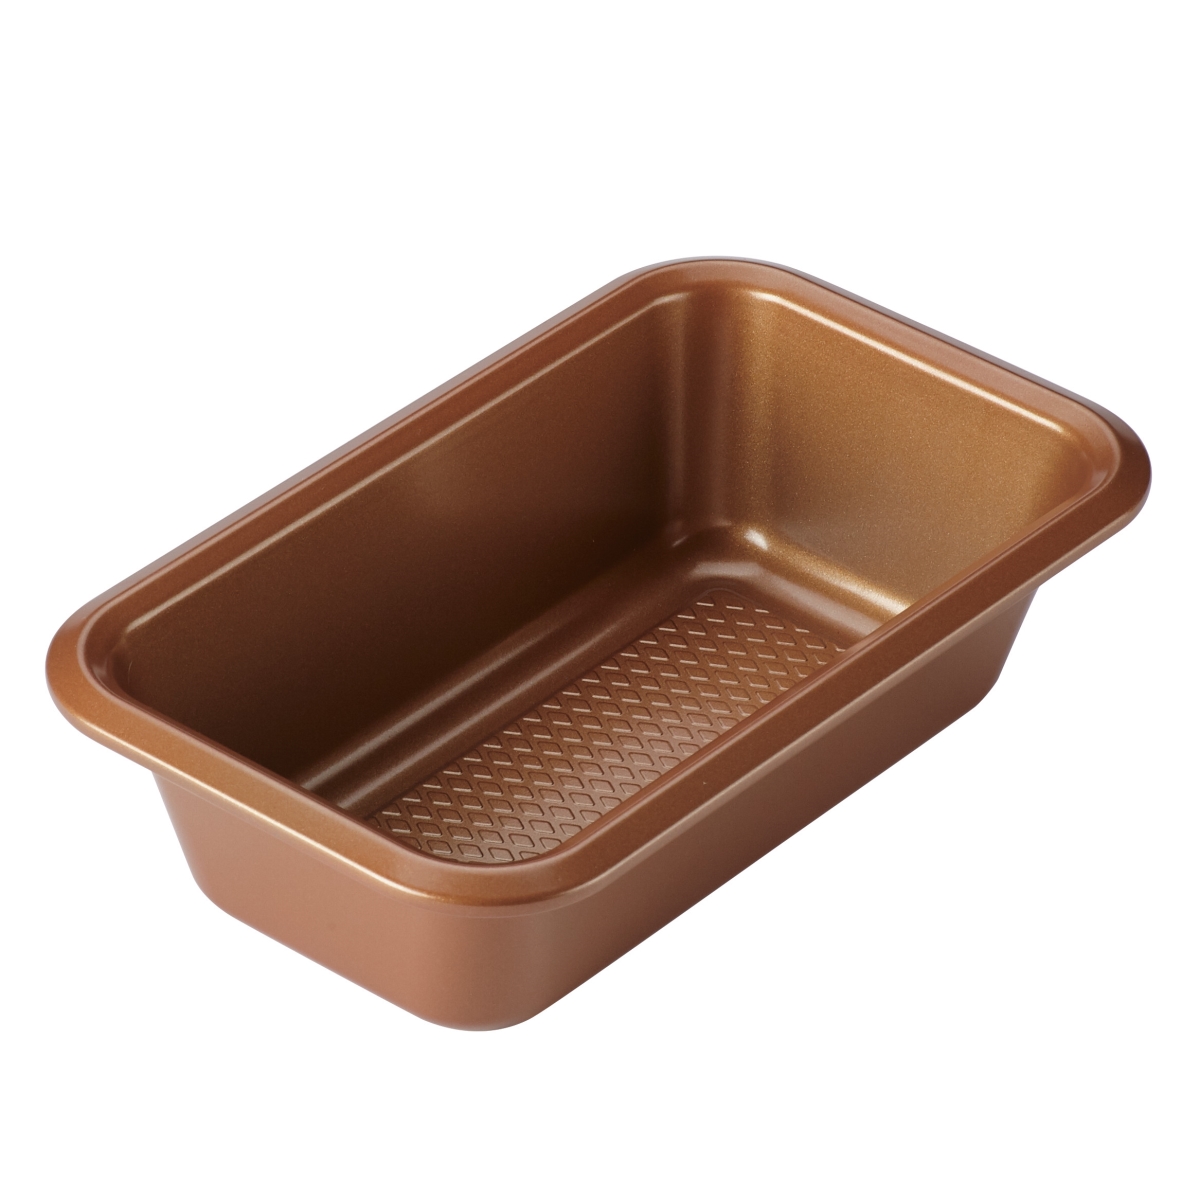 47001 Loaf Pan, 9 X 5 In. - Copper